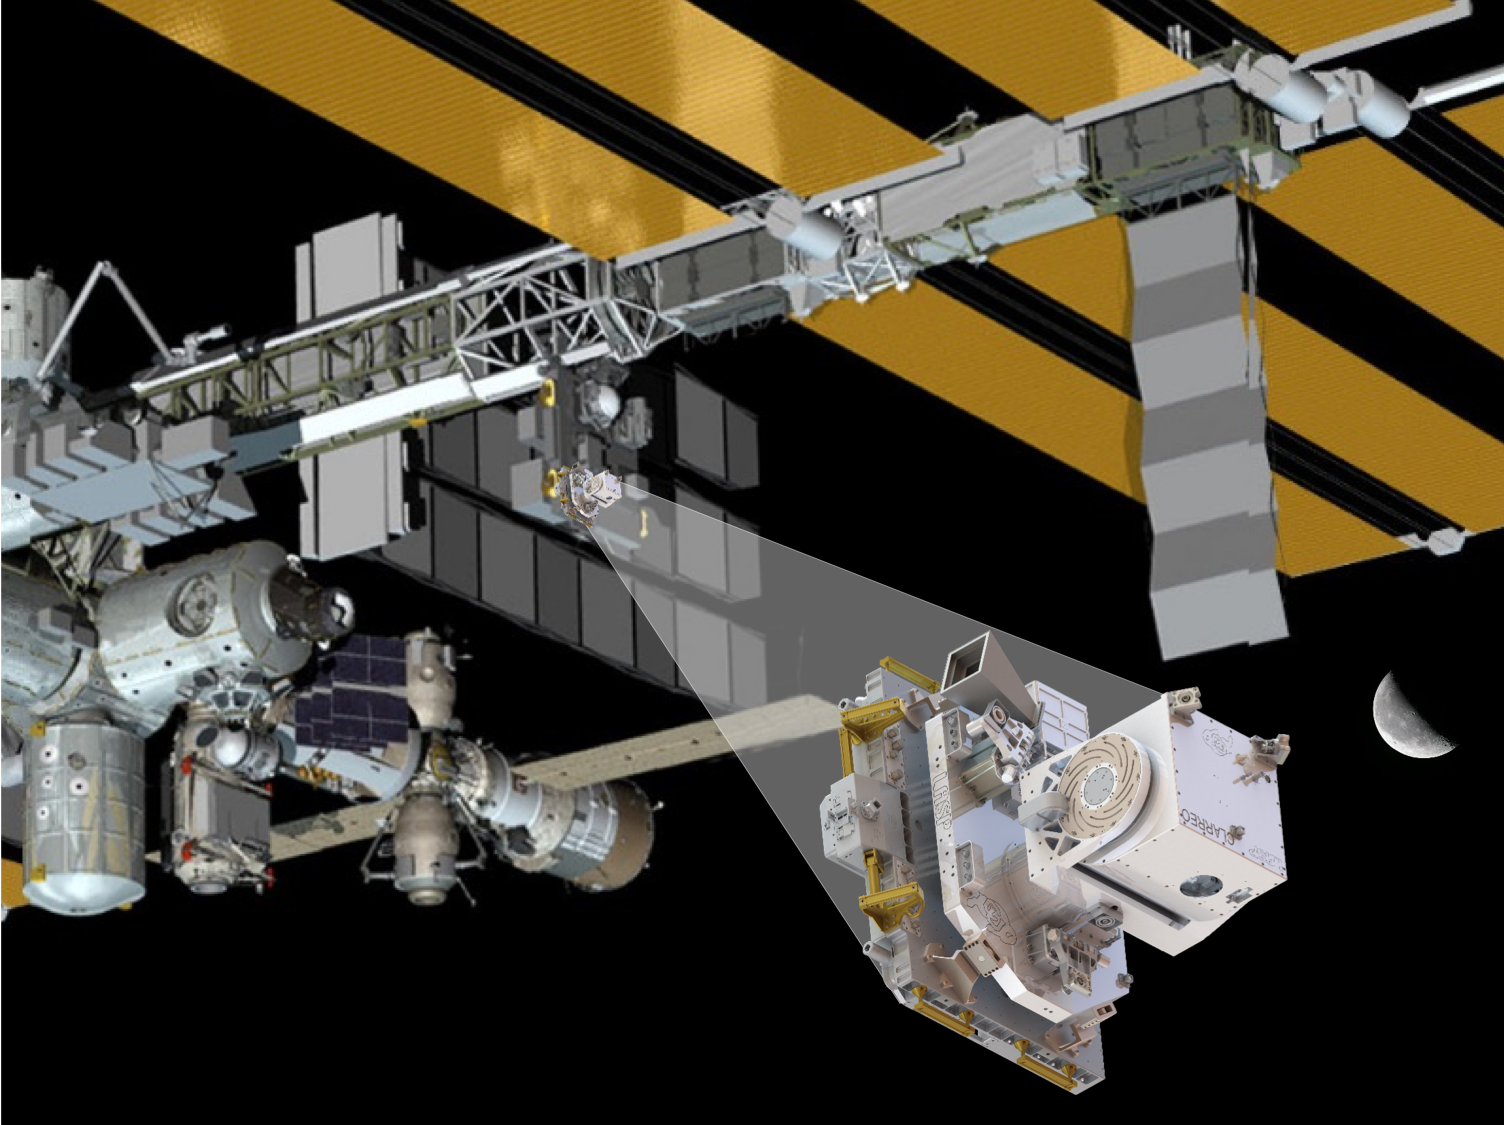 Close-up view of the CLARREO Pathfinder HySICS instrument on the ISS